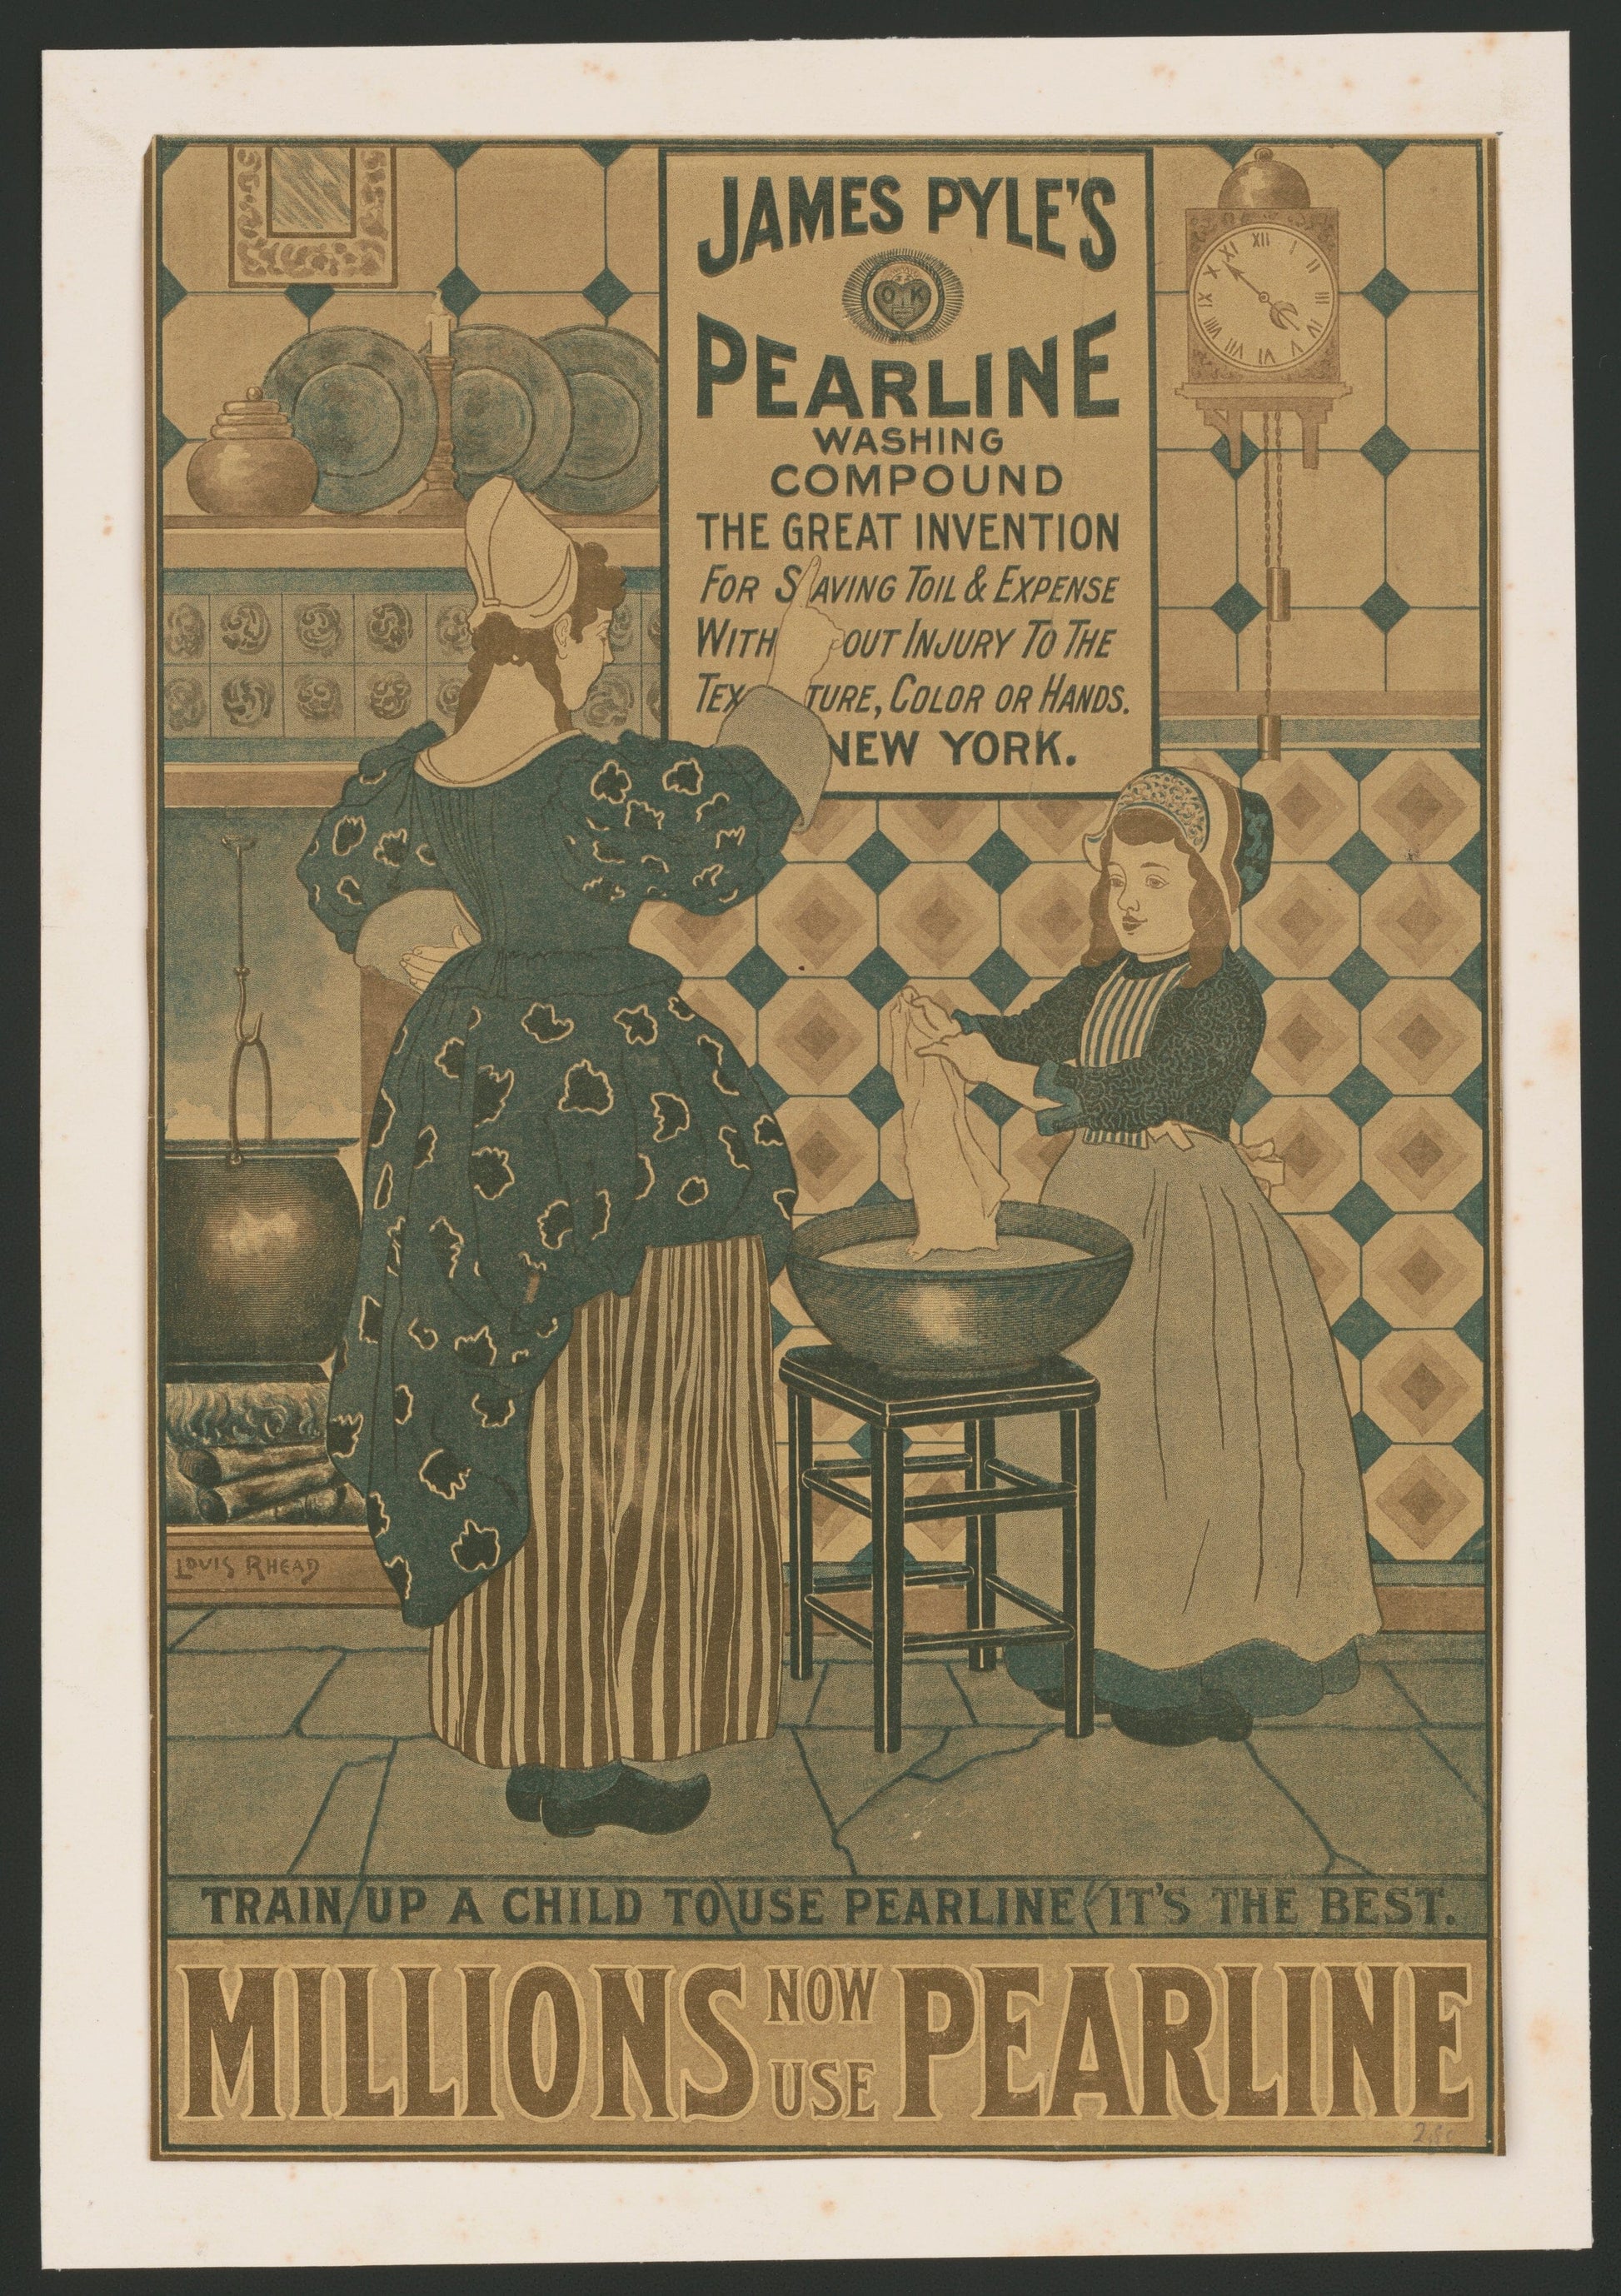 Pearline laundry poster (1900s) | Laundry room wall art | Louis Rhead Posters, Prints, & Visual Artwork The Trumpet Shop Vintage Prints   